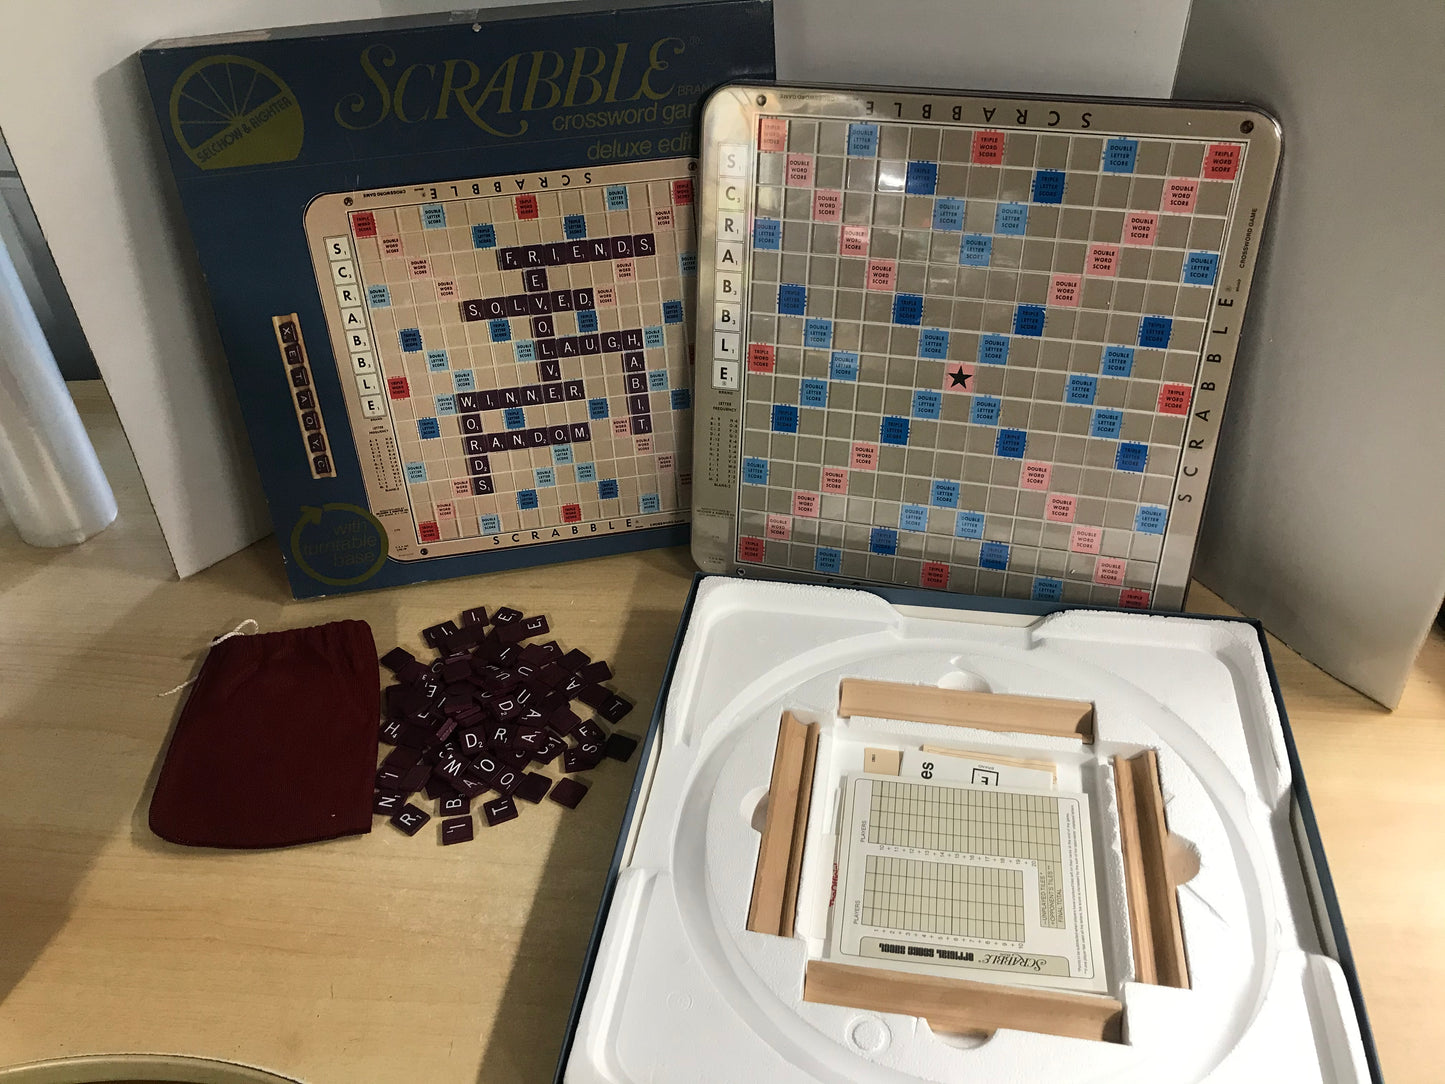 Game 1982 Vintage Scrabble Deluxe Edition No 71 With Turntable Base Selchow & Righter RARE As New Complete